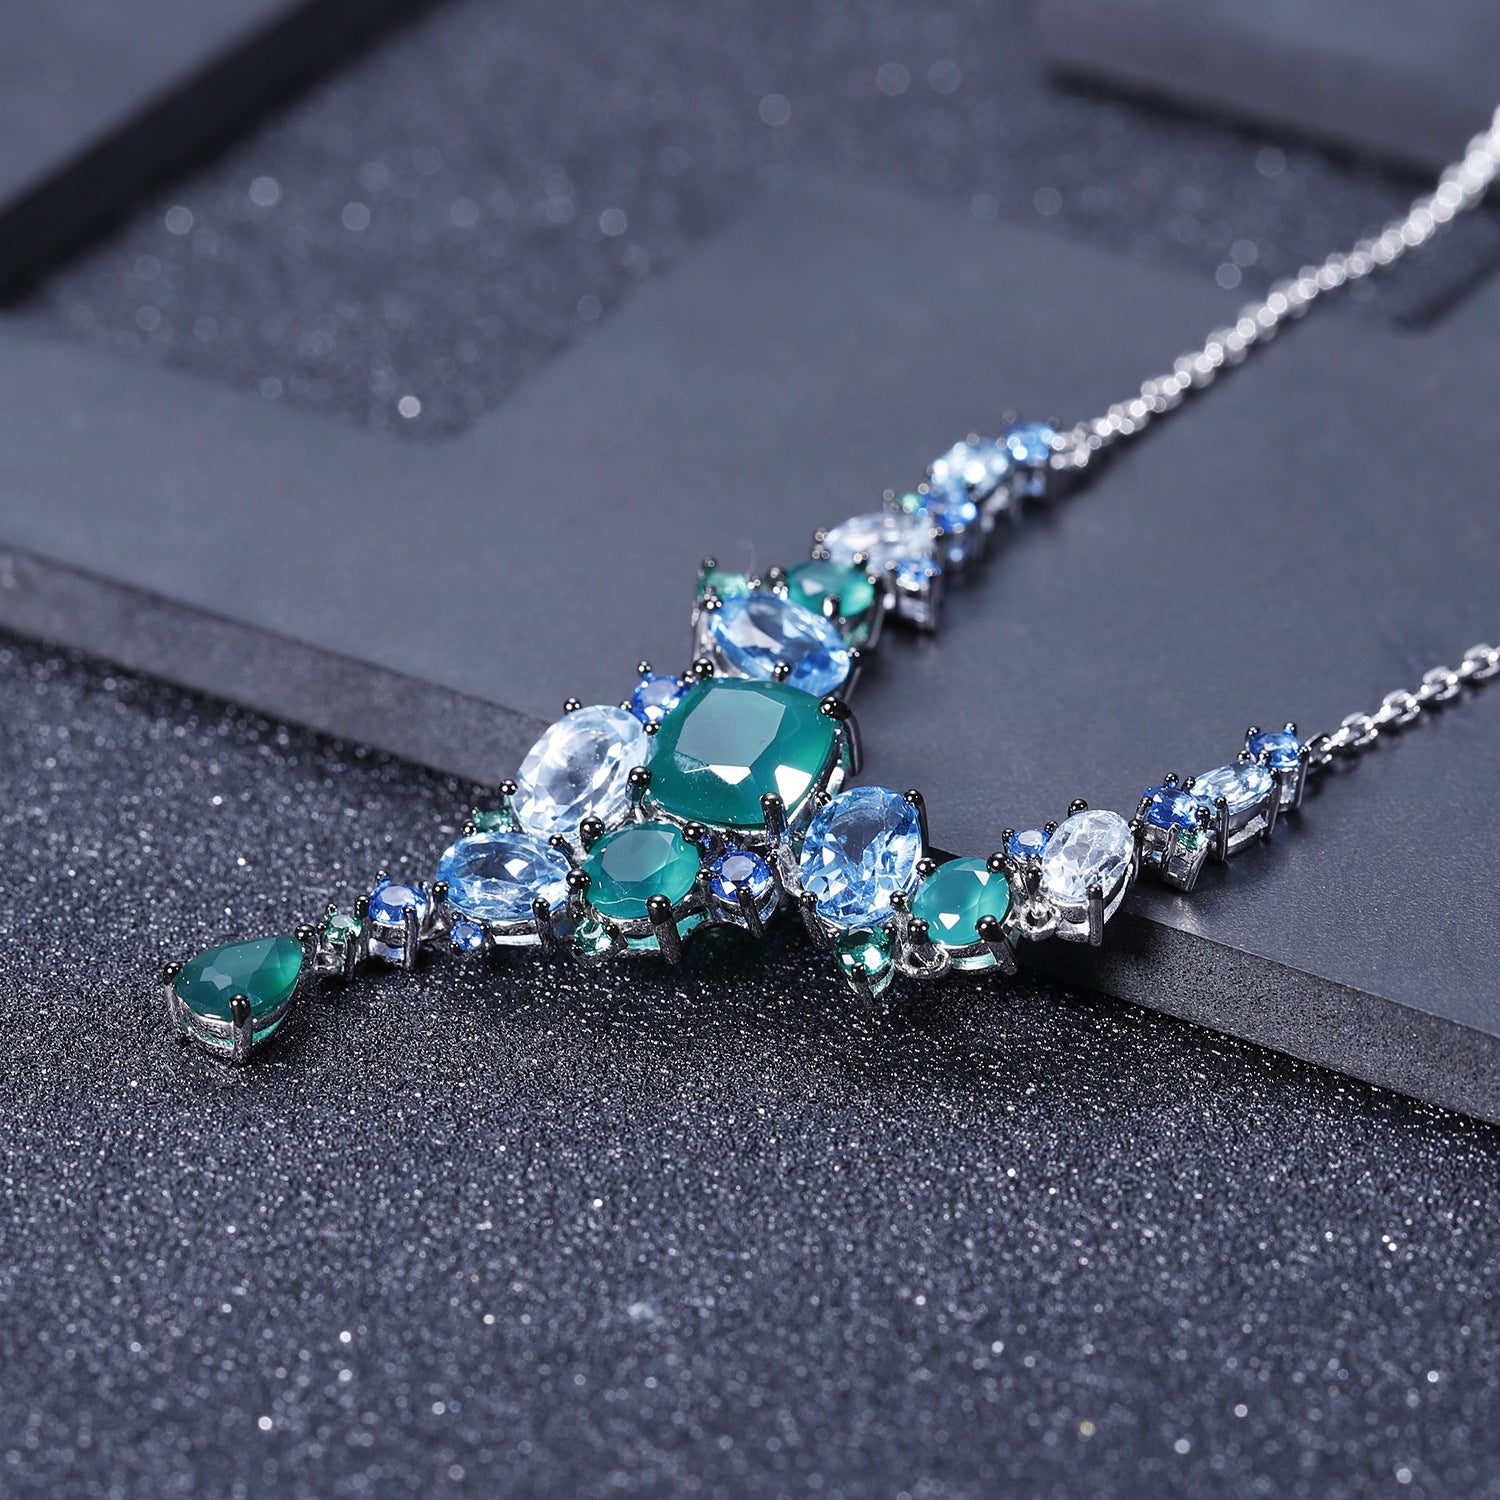 Unique Banquet Luxury Design Natural Topaz with Colourful Gemstones Pendant Sterling Silver Necklace for Women